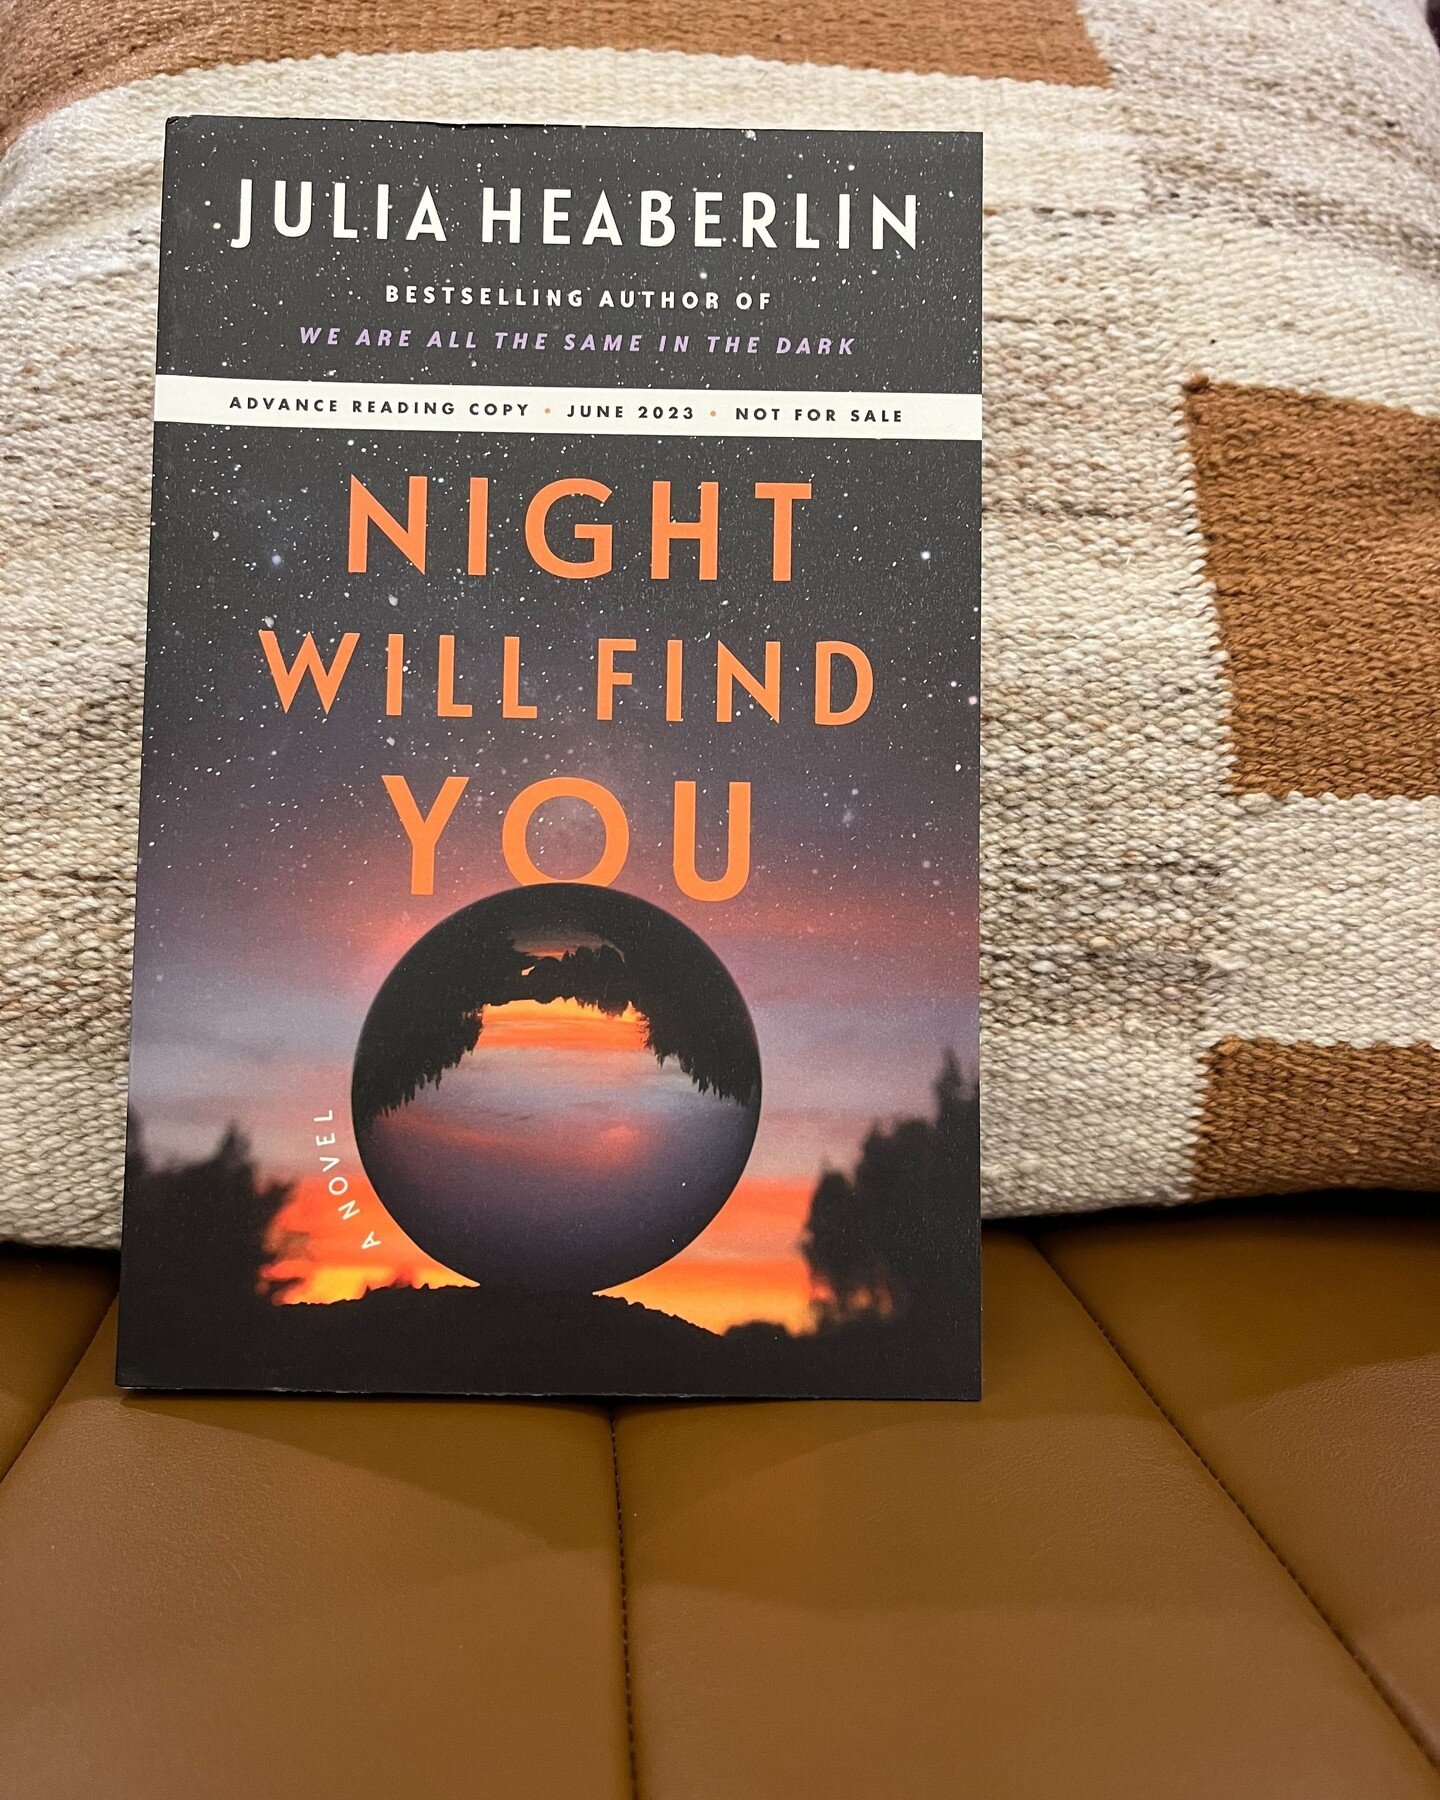 Join early readers from @goodreads who are raving about Night Will Find You by @juliaheaberlin by entering for your chance to win 1 of 25 ARCs!  Link in bio.🎉🎉⁣
⁣
This sharply observed psychological thriller explores the nature of conspiracy theori